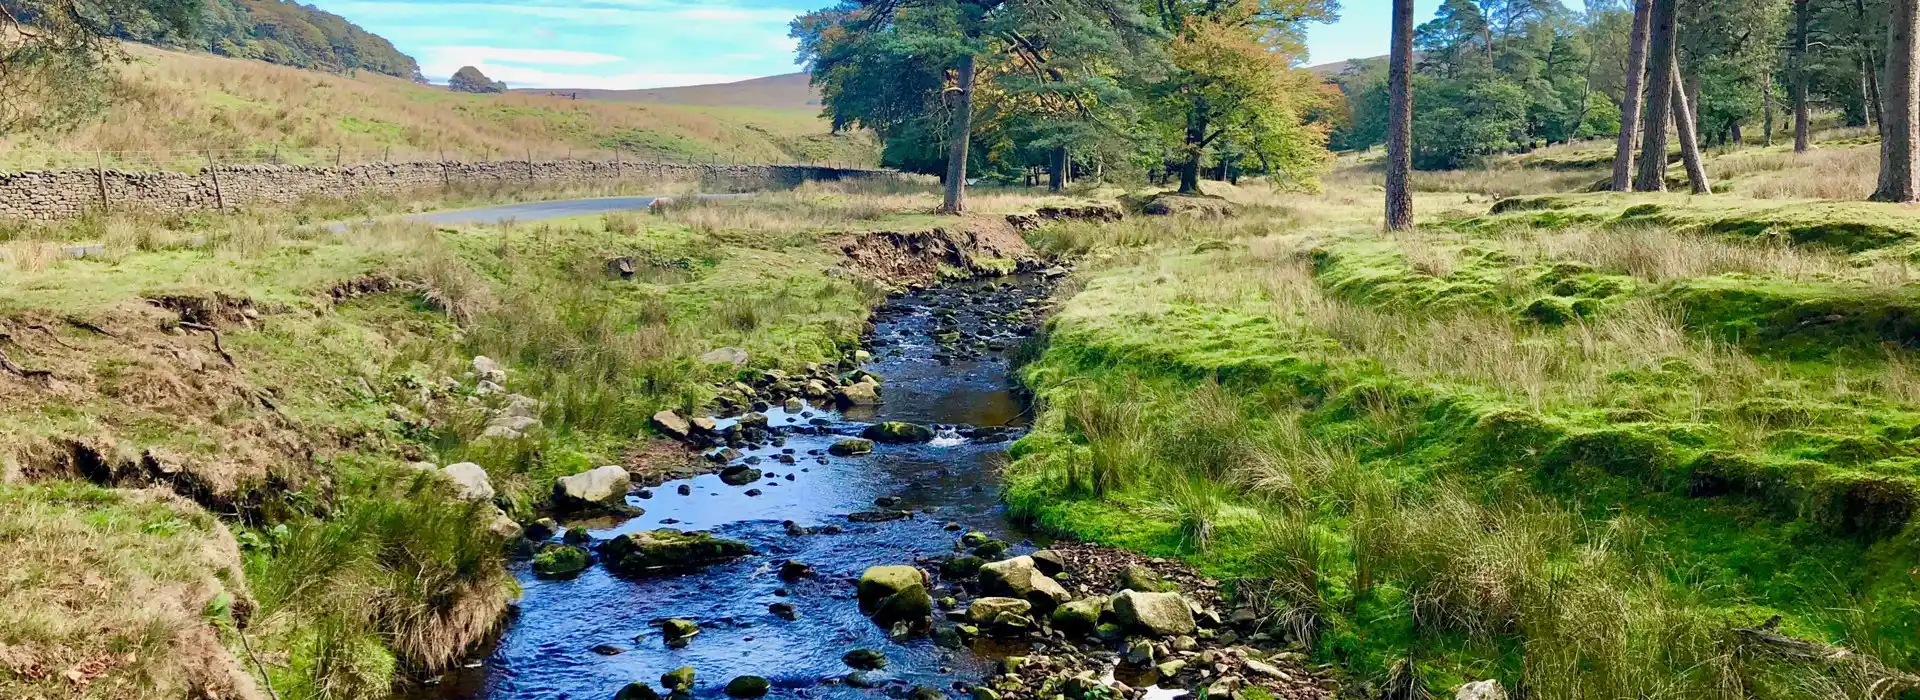 Campsites near the Trough of Bowland